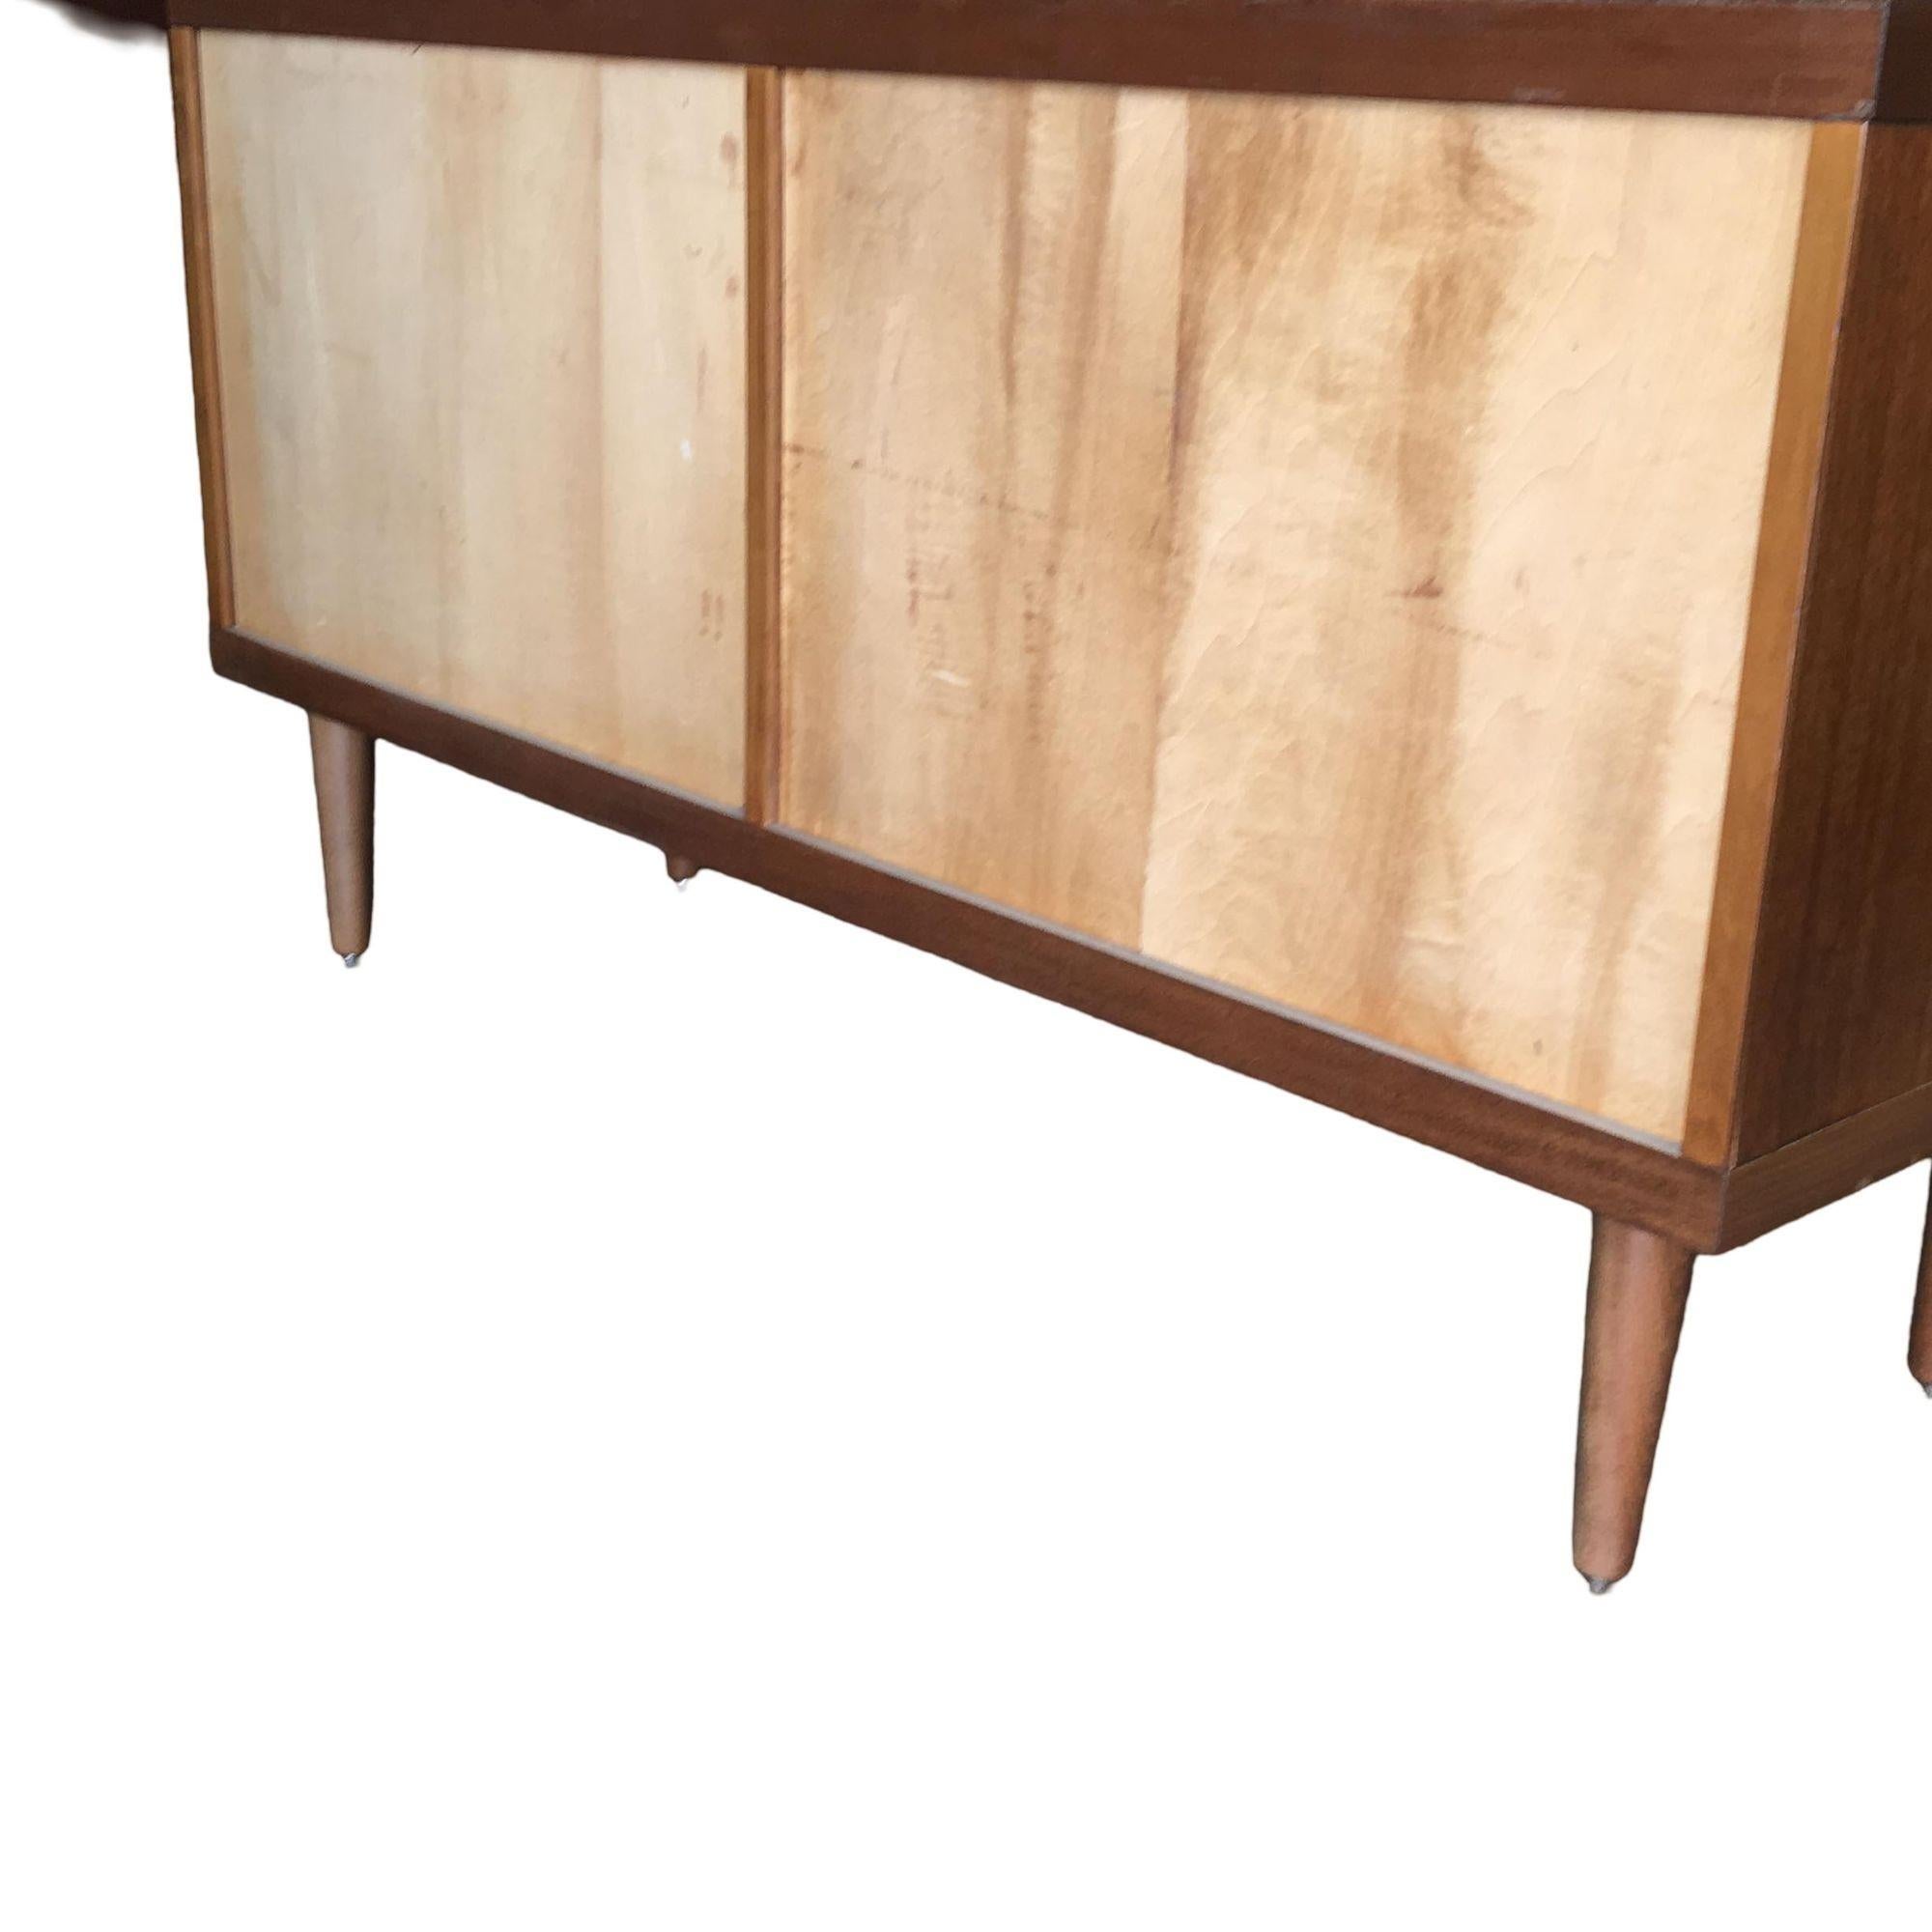 American Danish Modern Rose Stained Credenza Cabinet with Sculpted Pig Nose Pulls For Sale